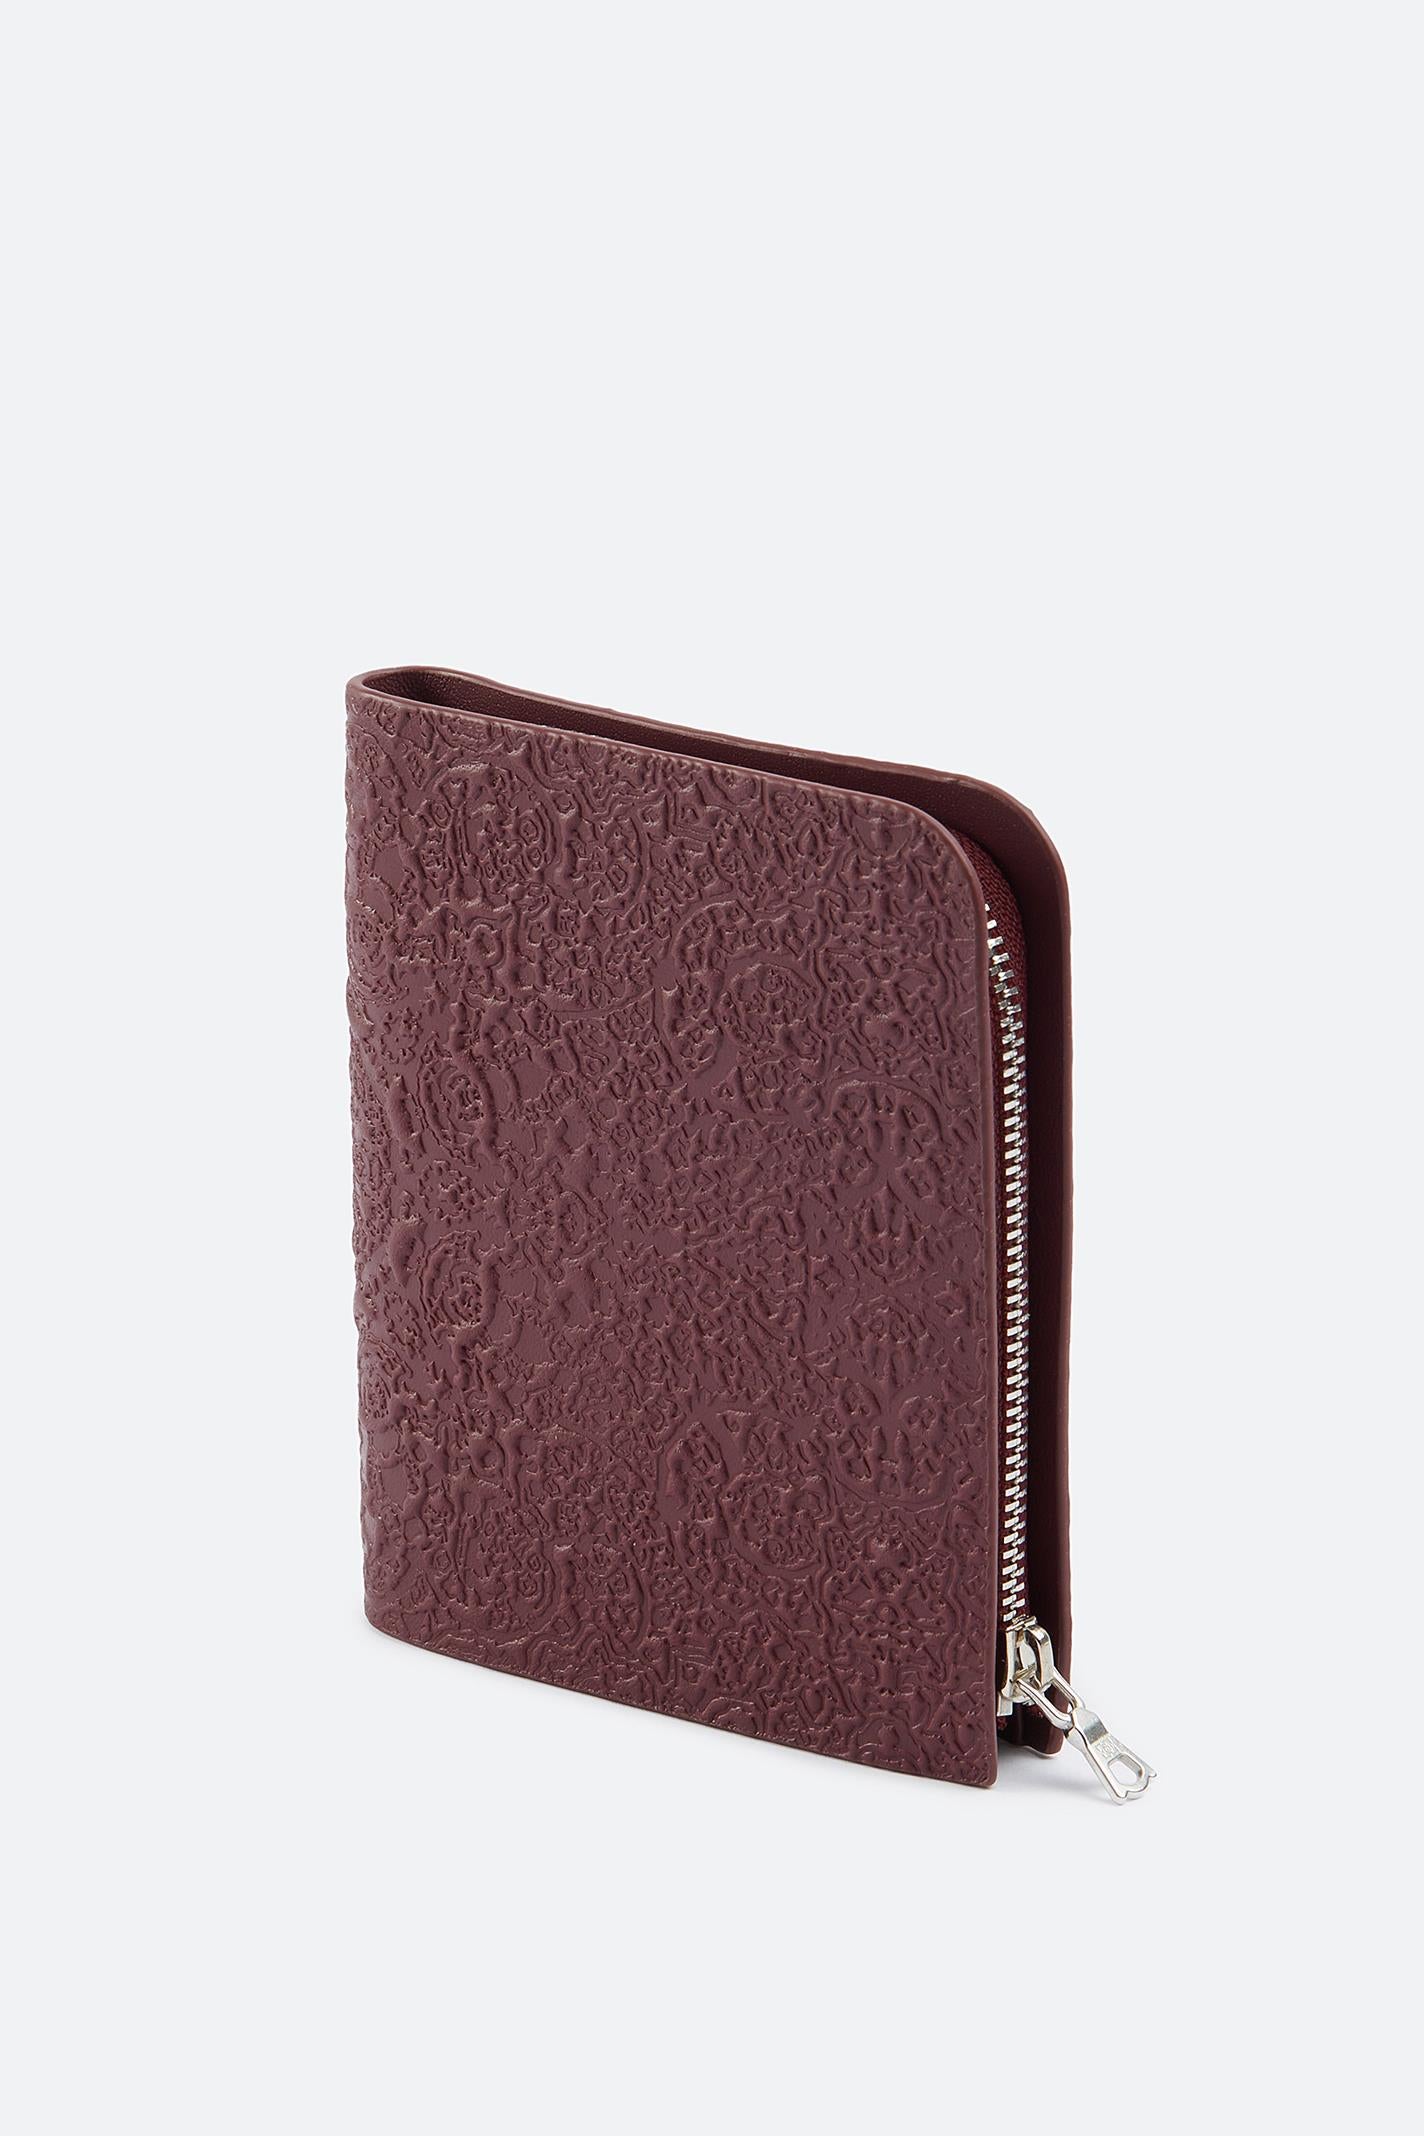  LARGE ZIPPED WALLET 014